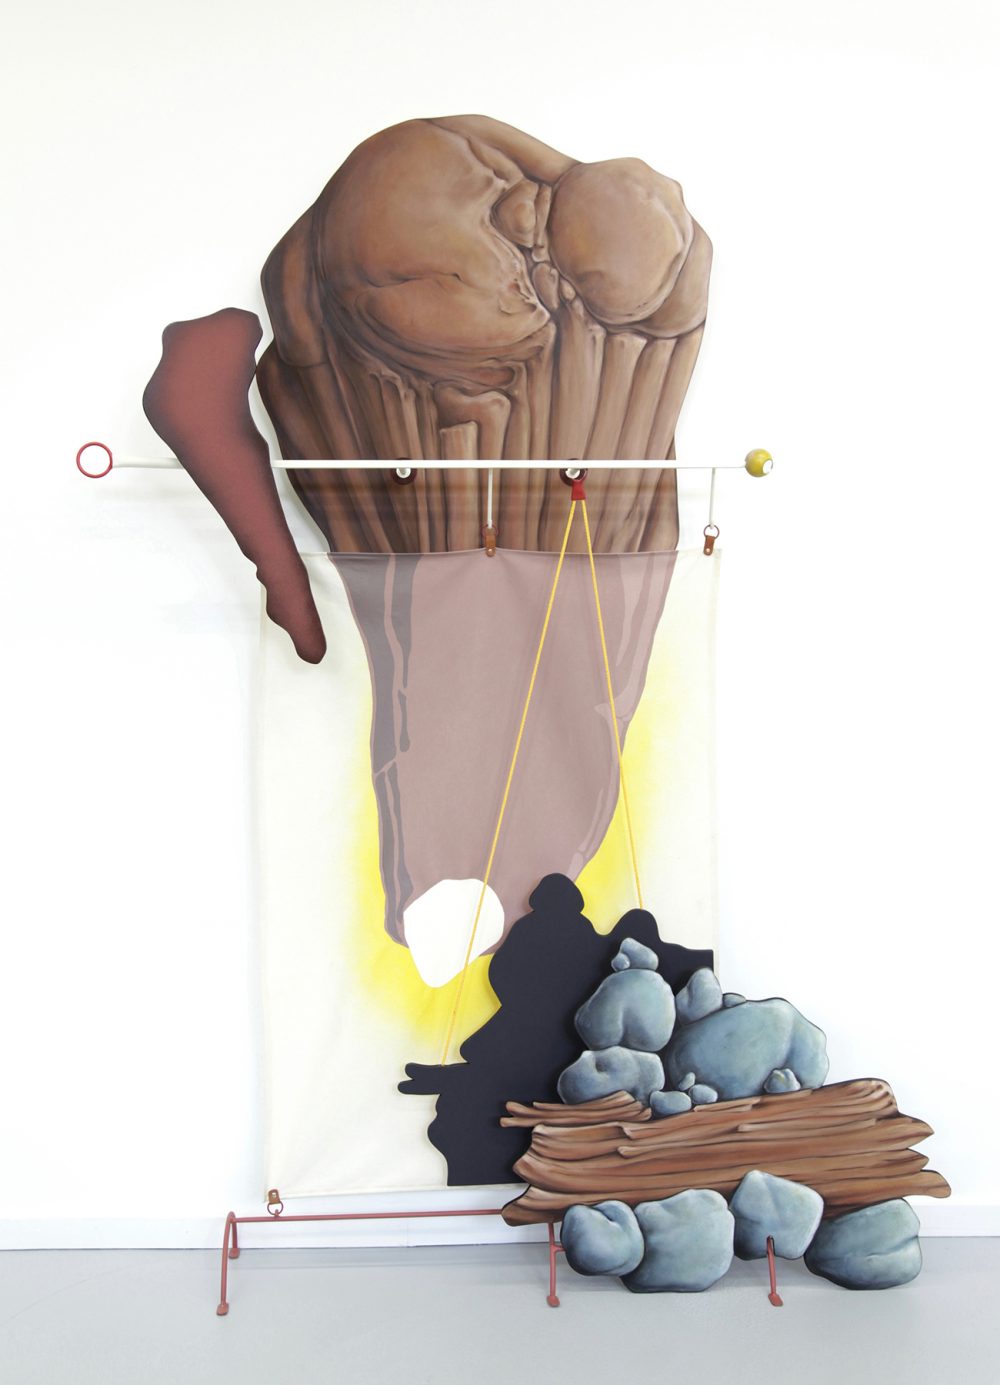 Large mixed media sculpture that is mounted on a white gallery wall, with elements that are on the floor. A large shaped wood panel is painted in trompe l'oeil style to look like brown rock forms; this is the top of the sculpture. A white metal bar is mounted in front of that, while a fabric panel hangs below. A brown metal bar with legs sits on the floor. The lower right of the sculpture is another trompe l'oeil painted wood panel that depicts grey rocks and brown wood.